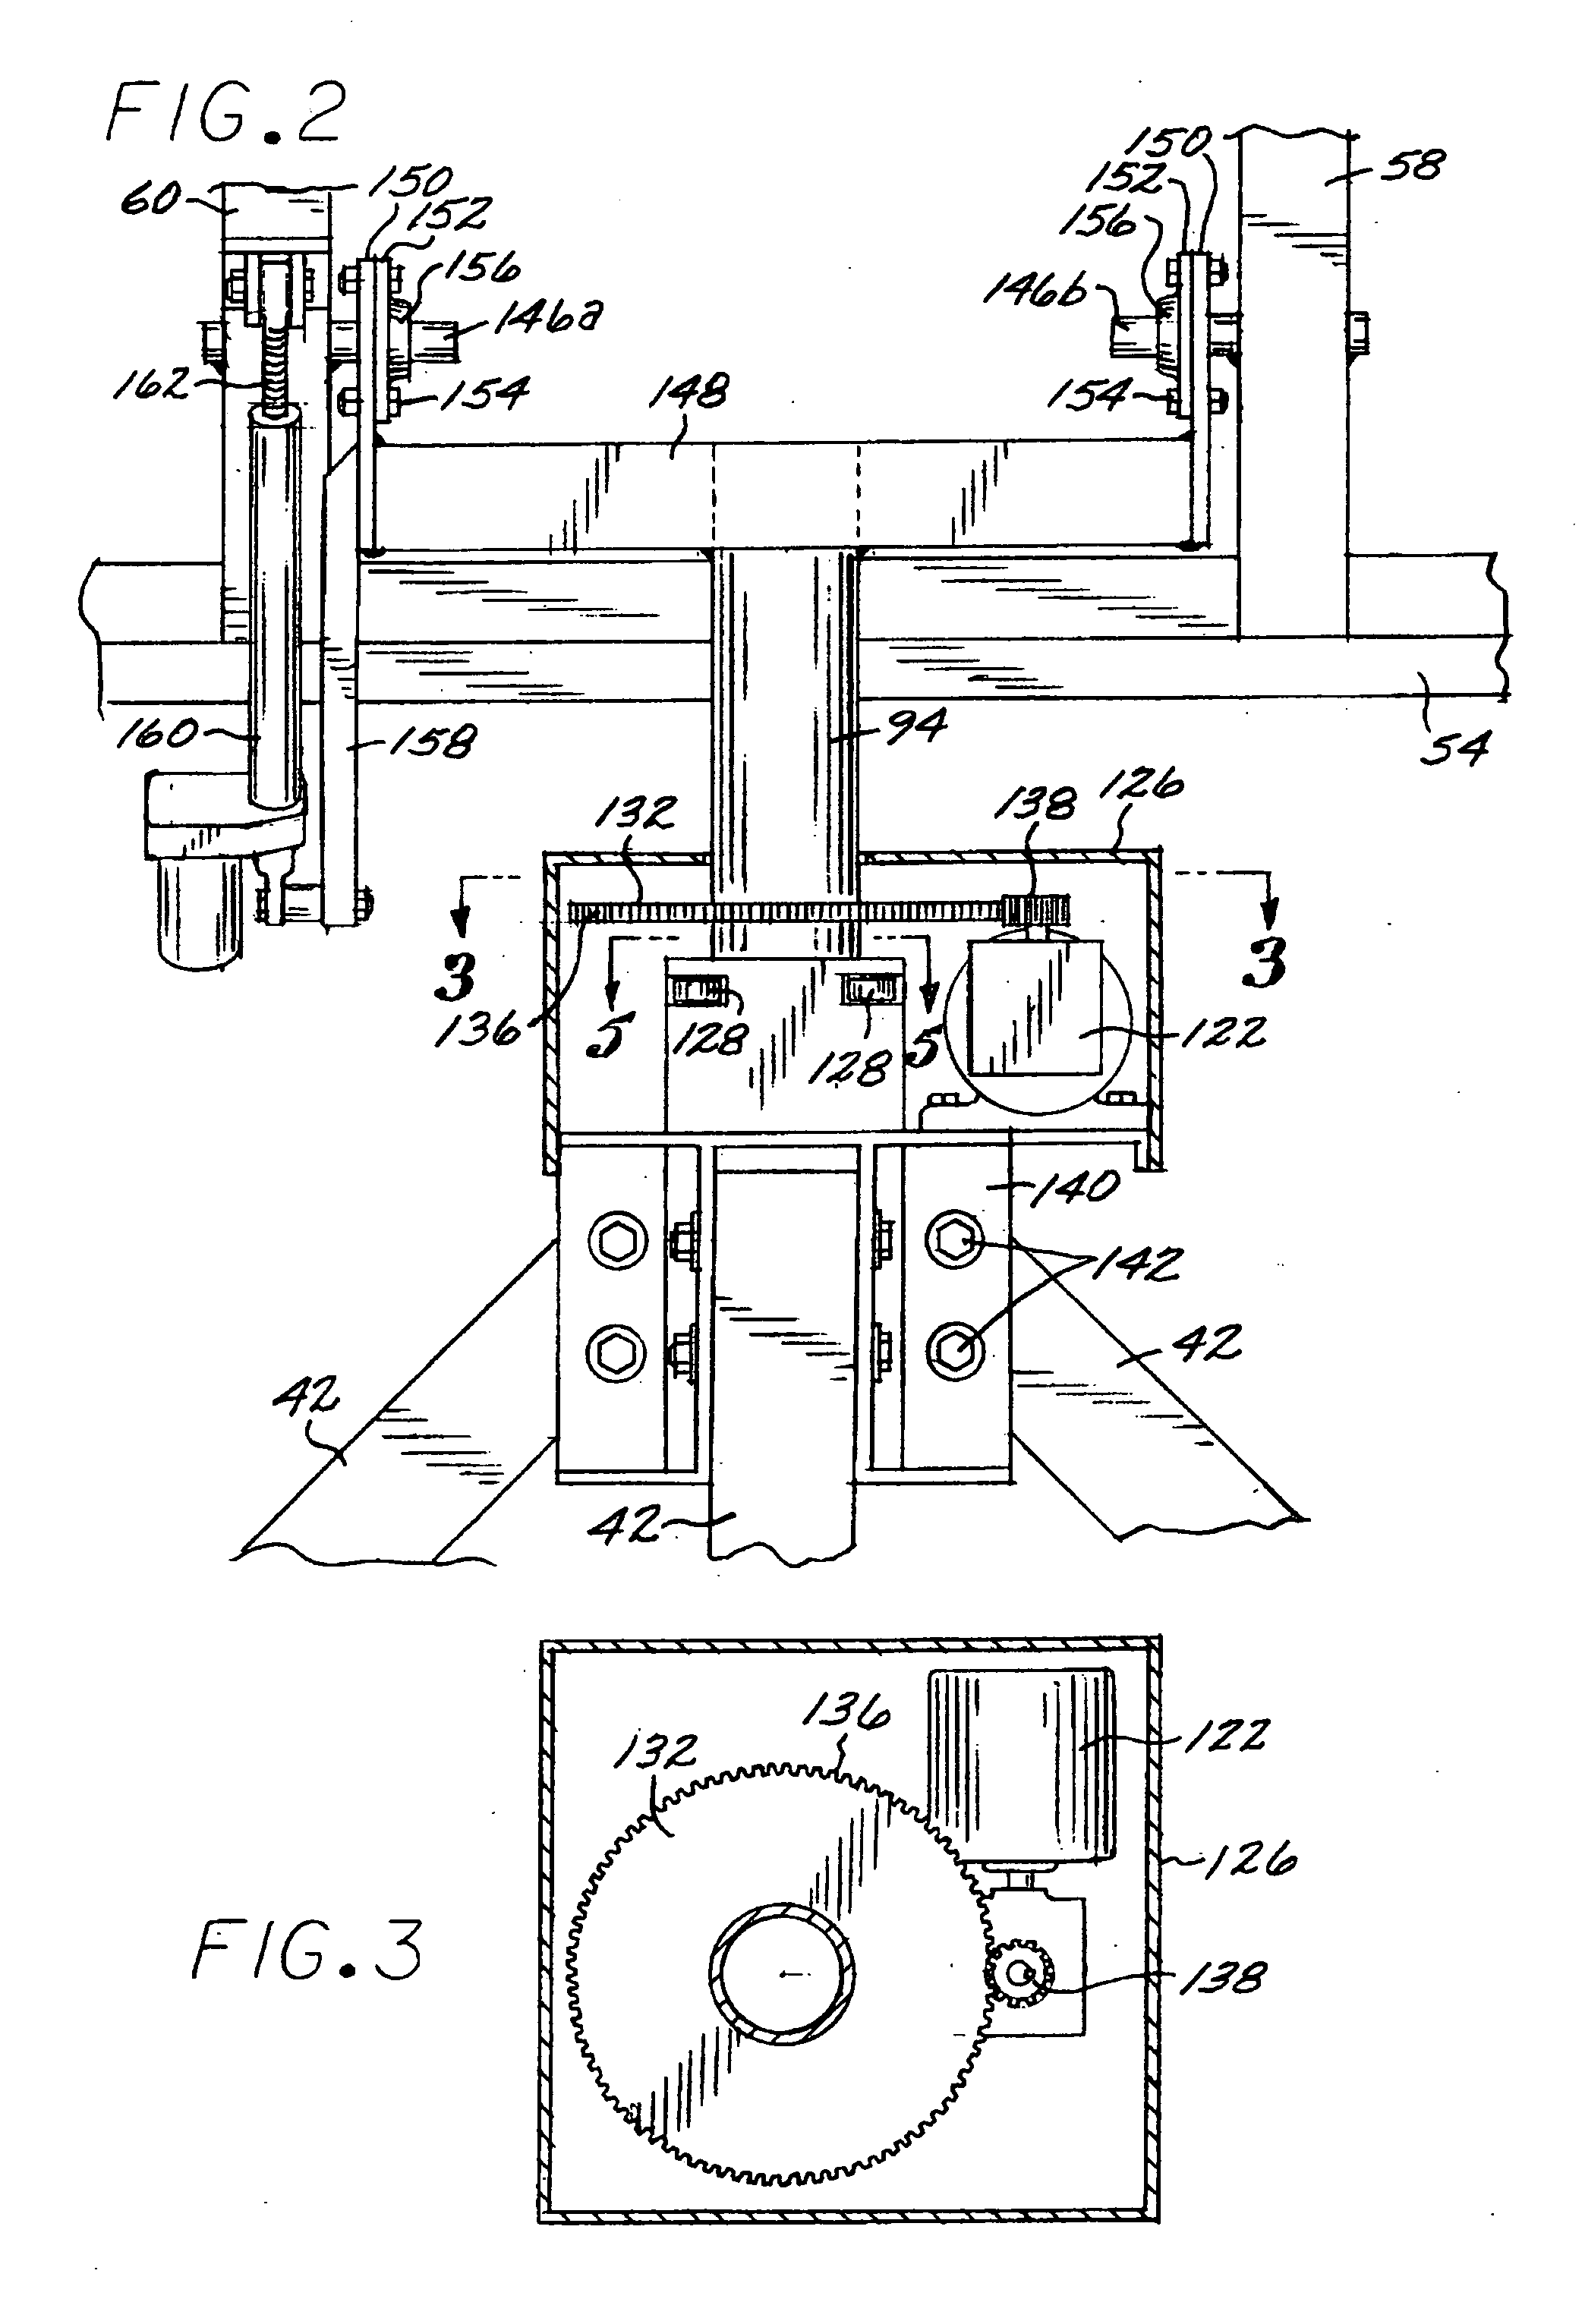 Balanced support and solar tracking system for panels of photovoltaic cells